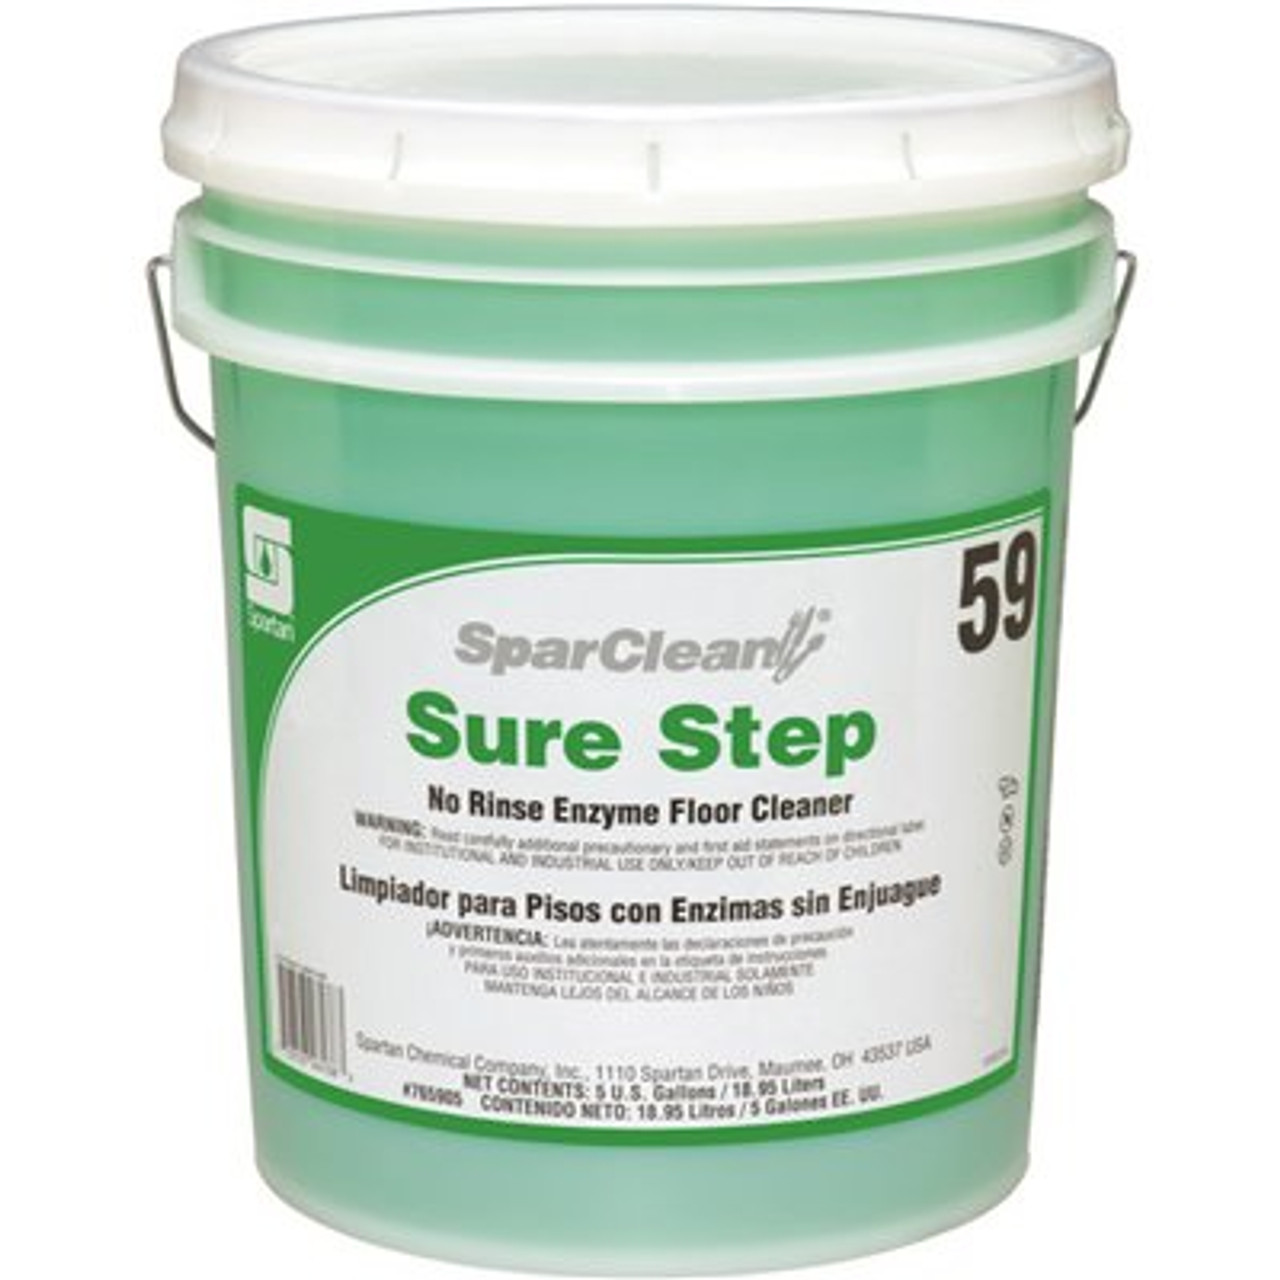 Spartan Chemical Company Sparclean Sure Step 5 Gallon Clean Scent Enzyme Floor Cleaner